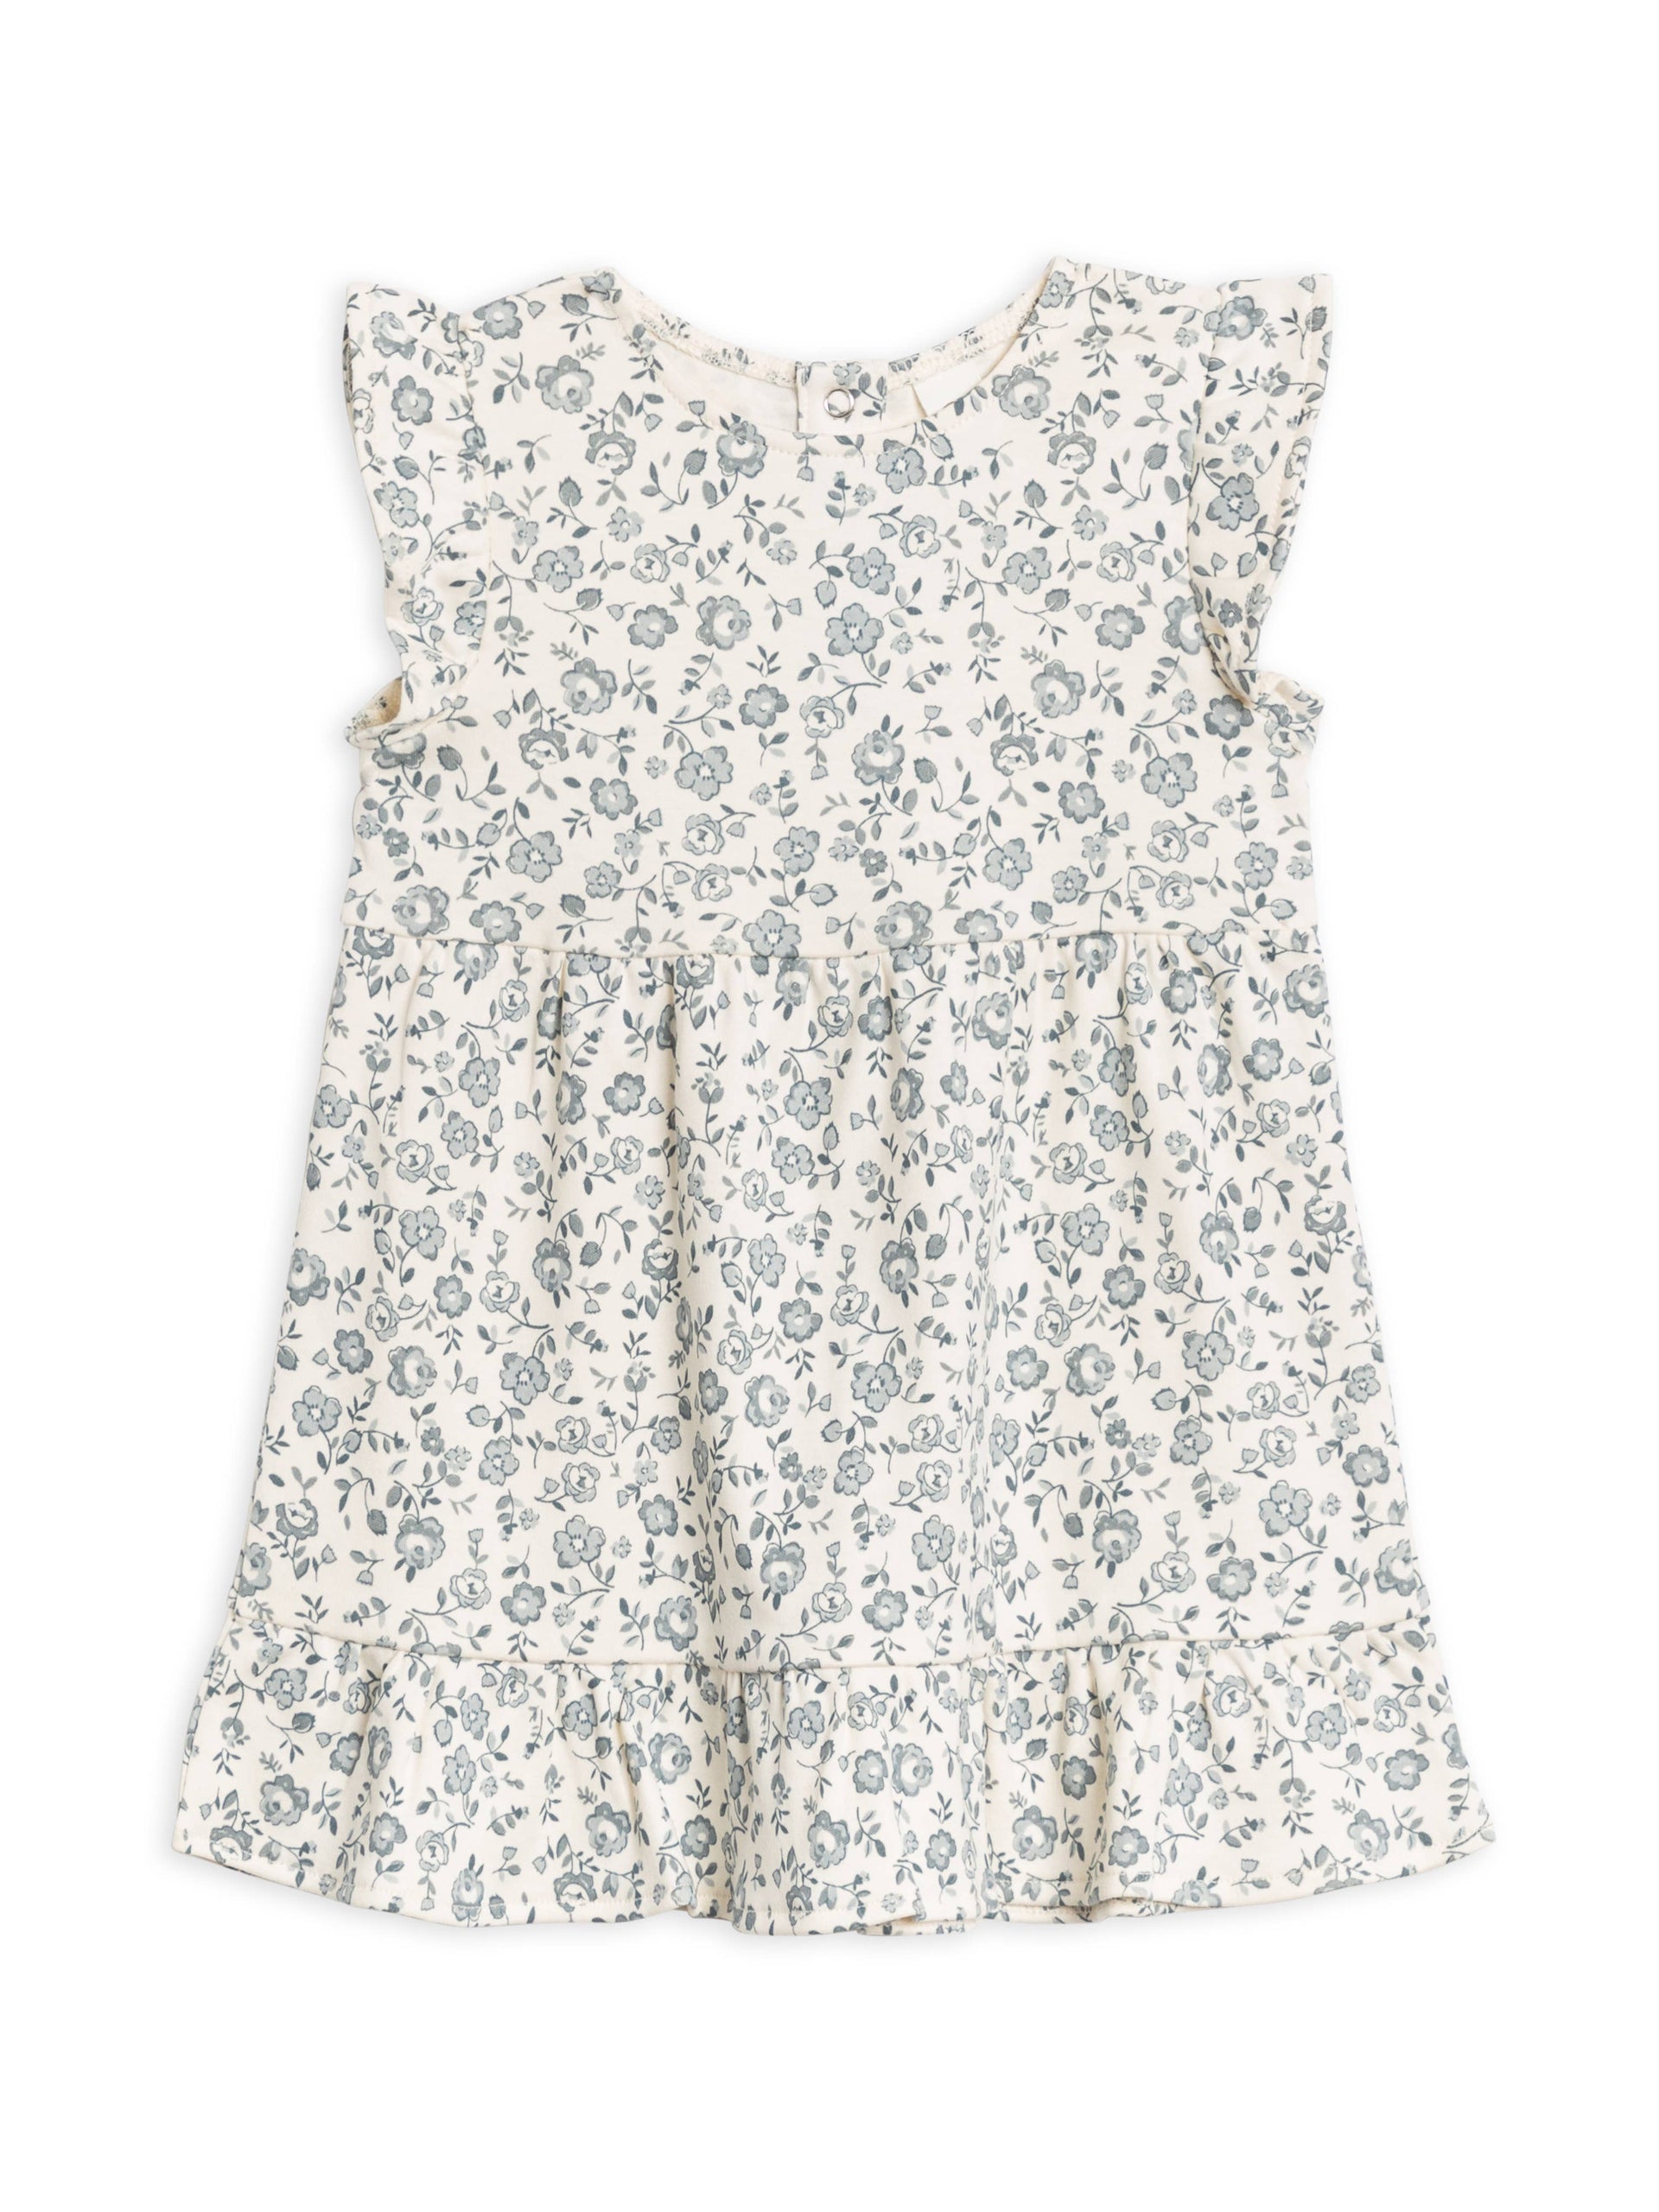 Colored Organics - Organic Baby & Kids Tilly Tiered Dress - Lena Floral: 3T